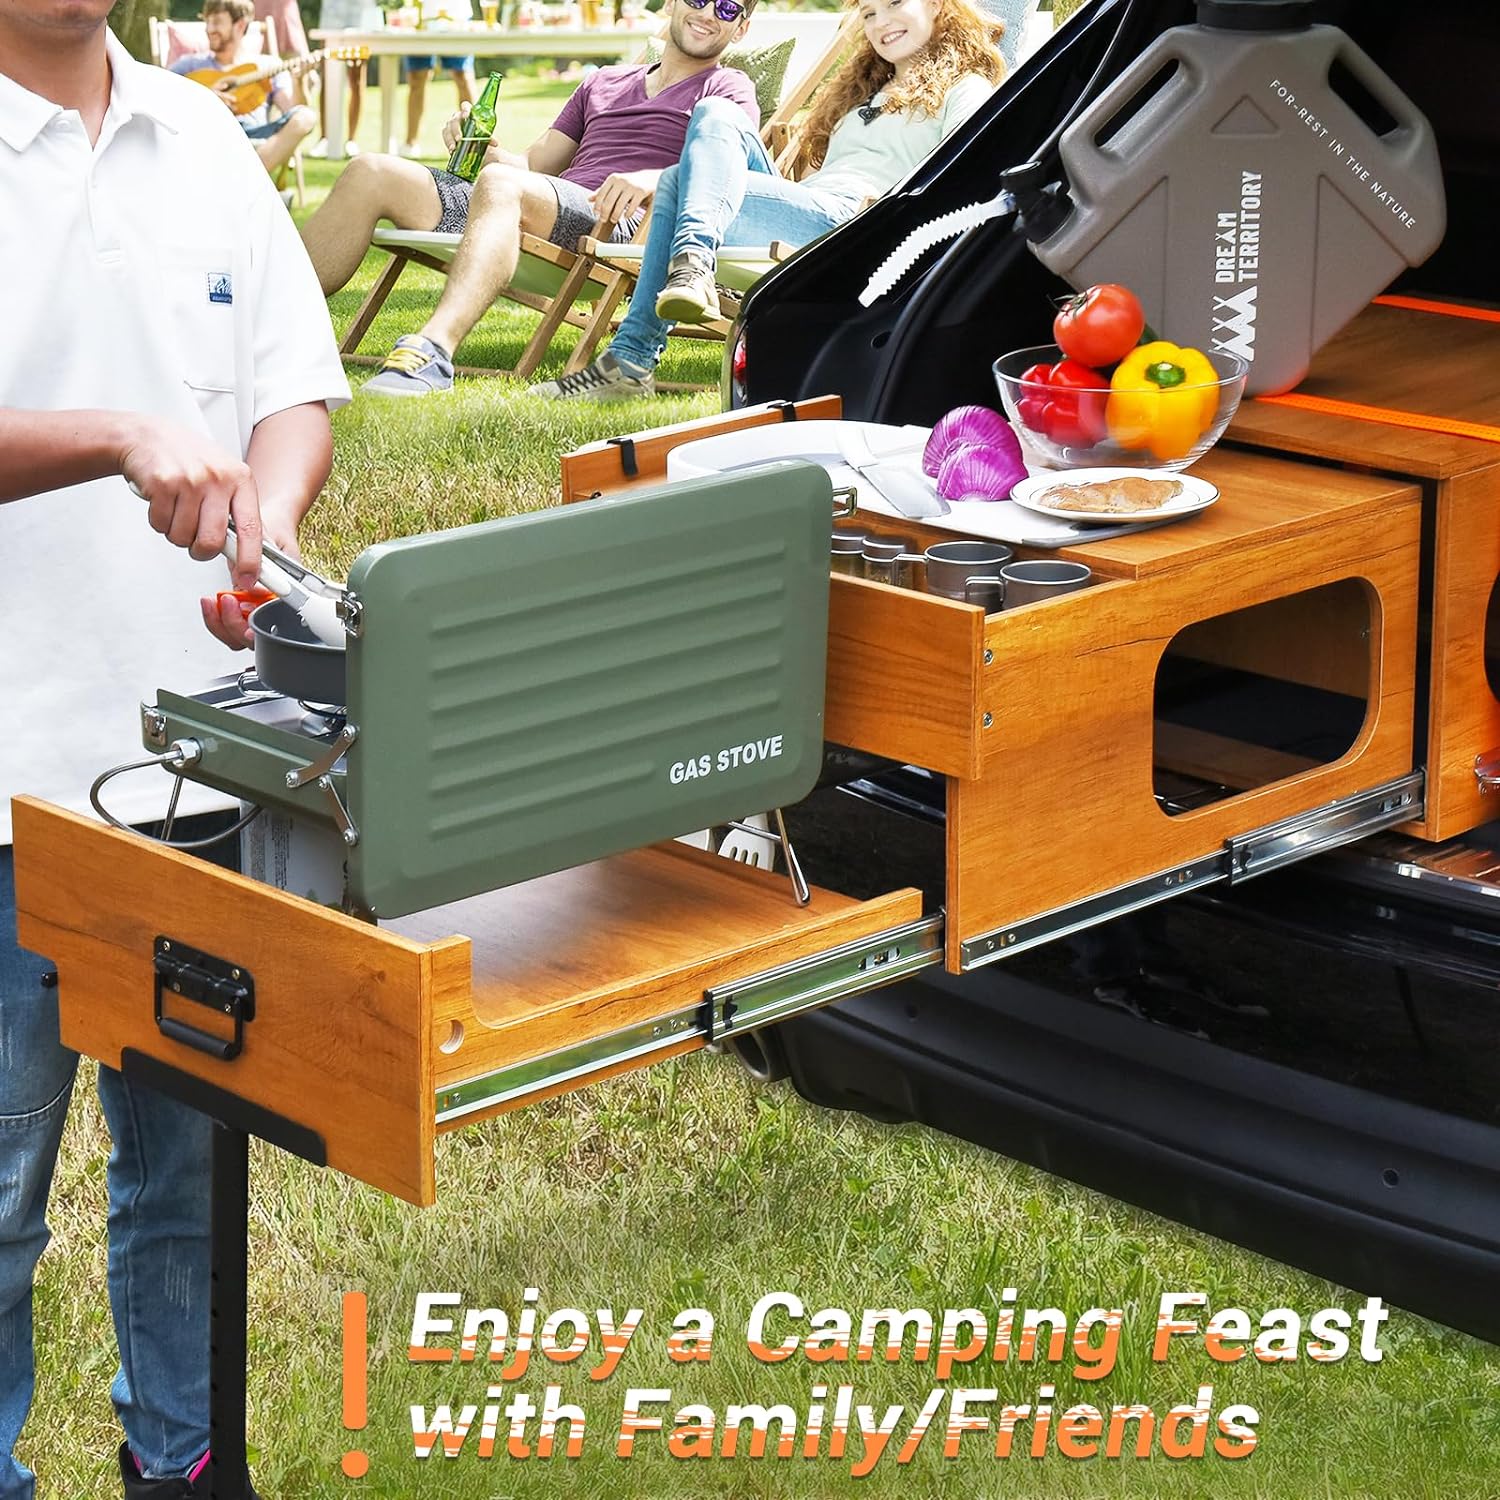 Overland Camp Kitchen, Vehicle Camping Table for Burners Camp Stove, Outdoor Portable Folding Kitchen Box with Bed Drawer Ideal for SUV/Truck/RV/Van(The Original and Patented)